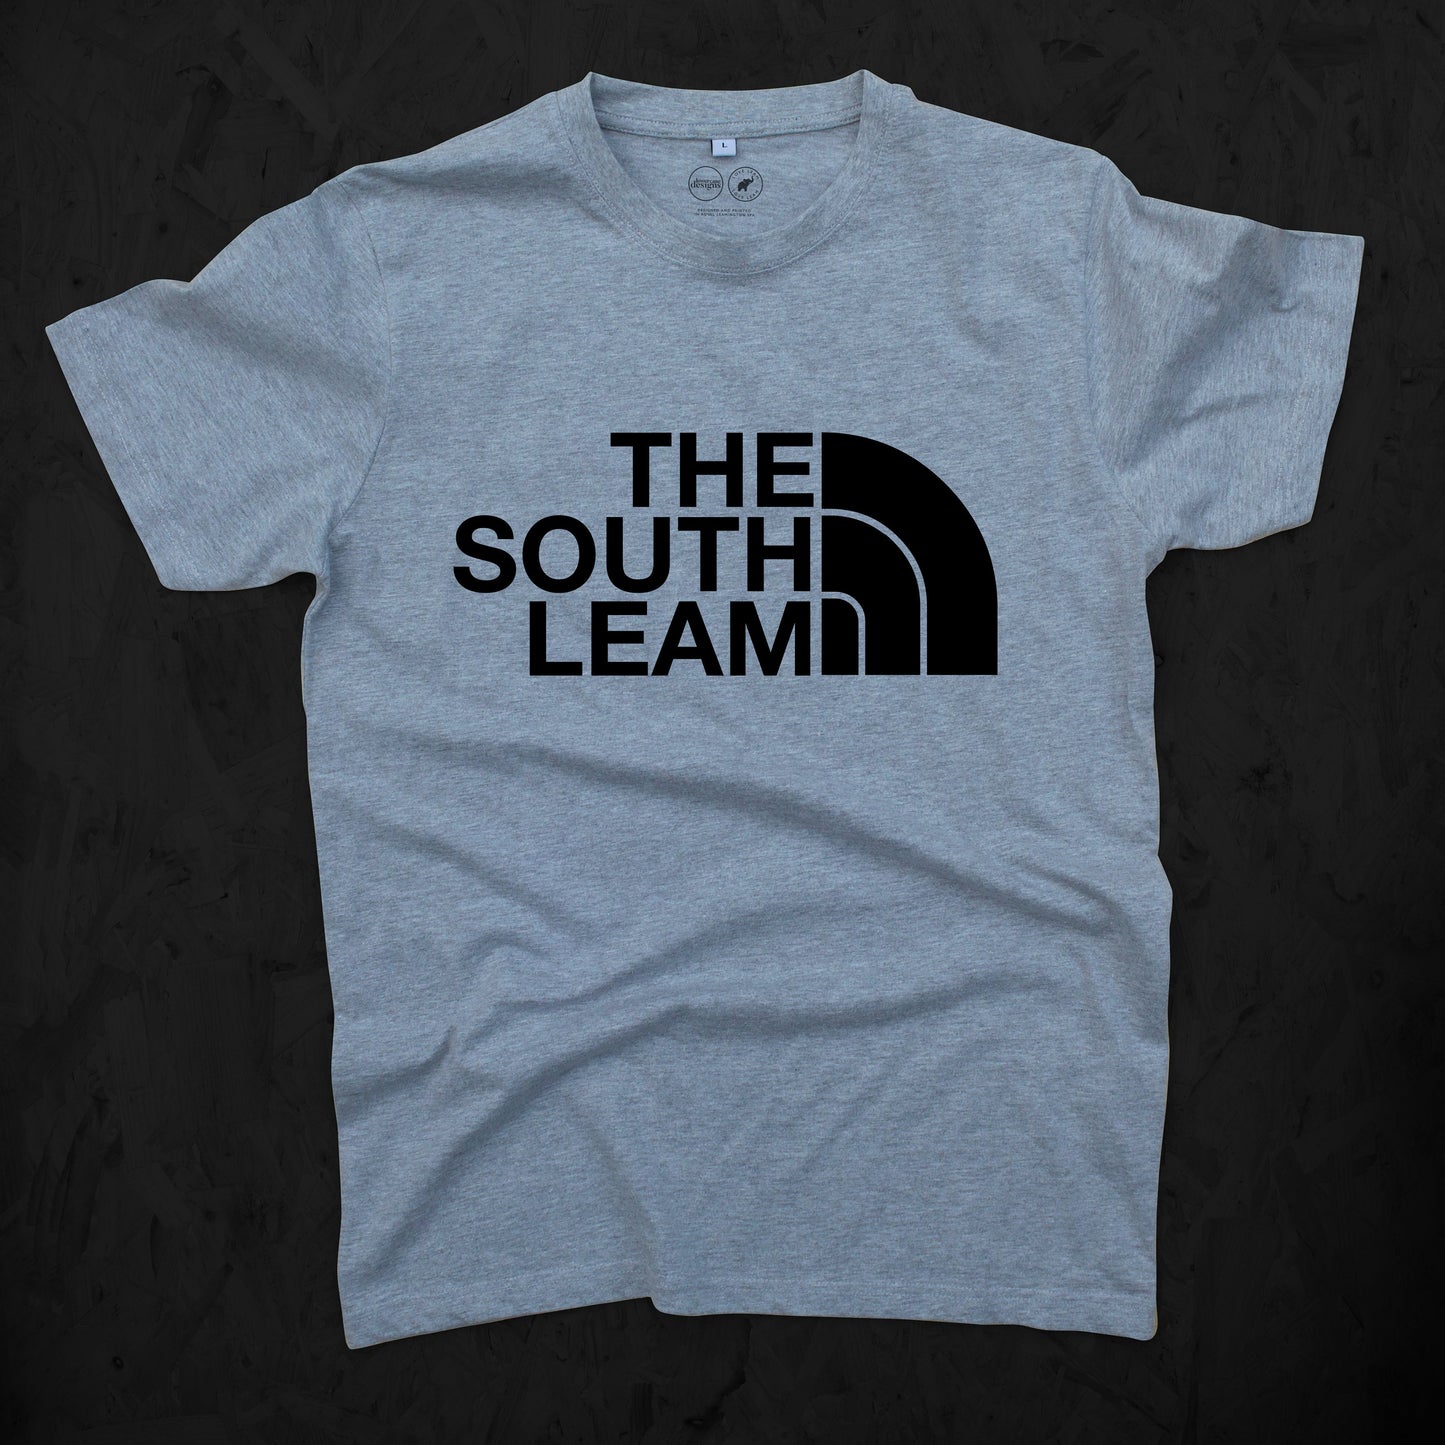 The South Leam Tee